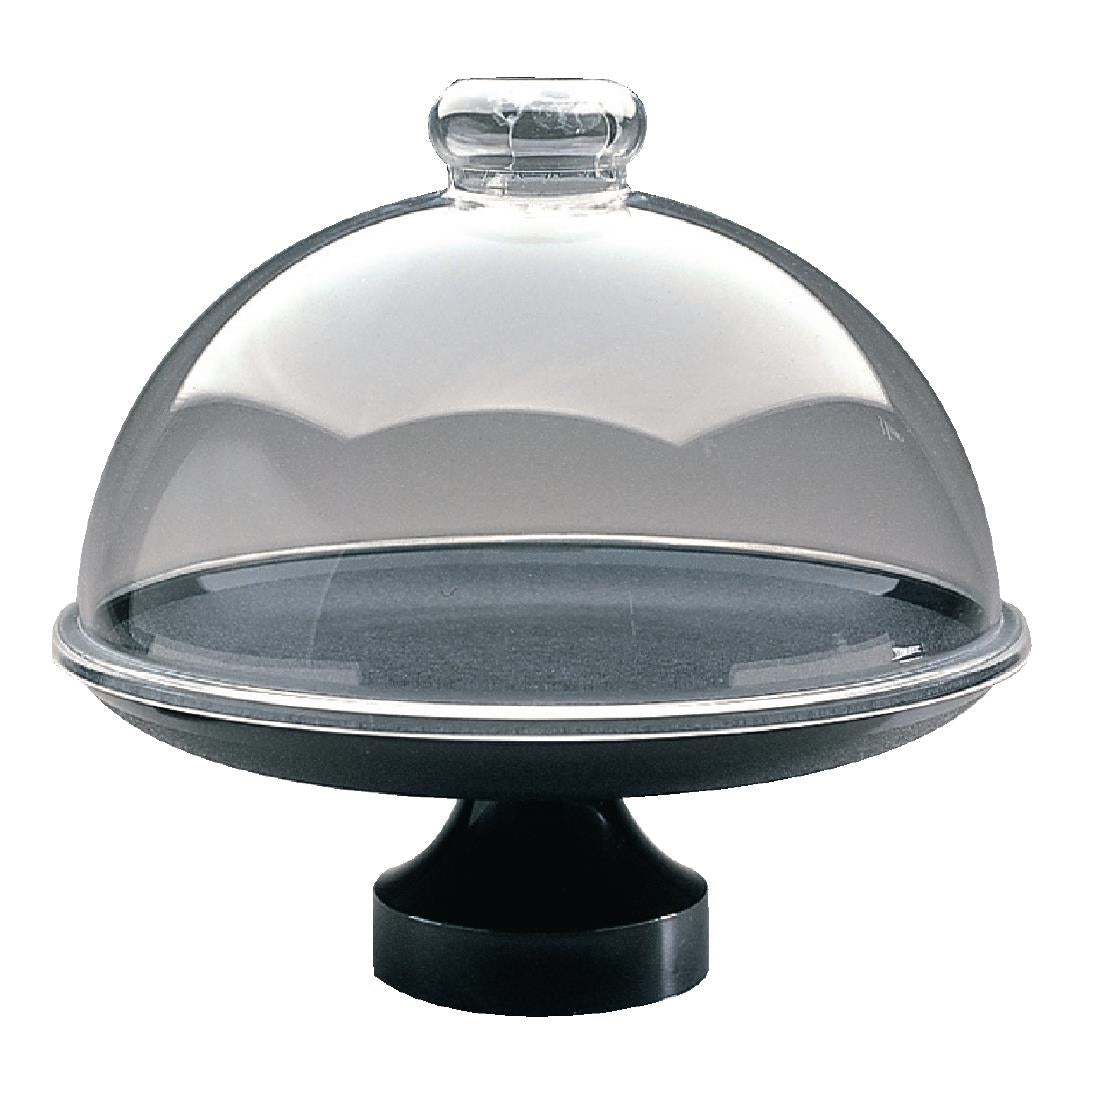 Dalebrook Frosted Dome Cover JD Catering Equipment Solutions Ltd